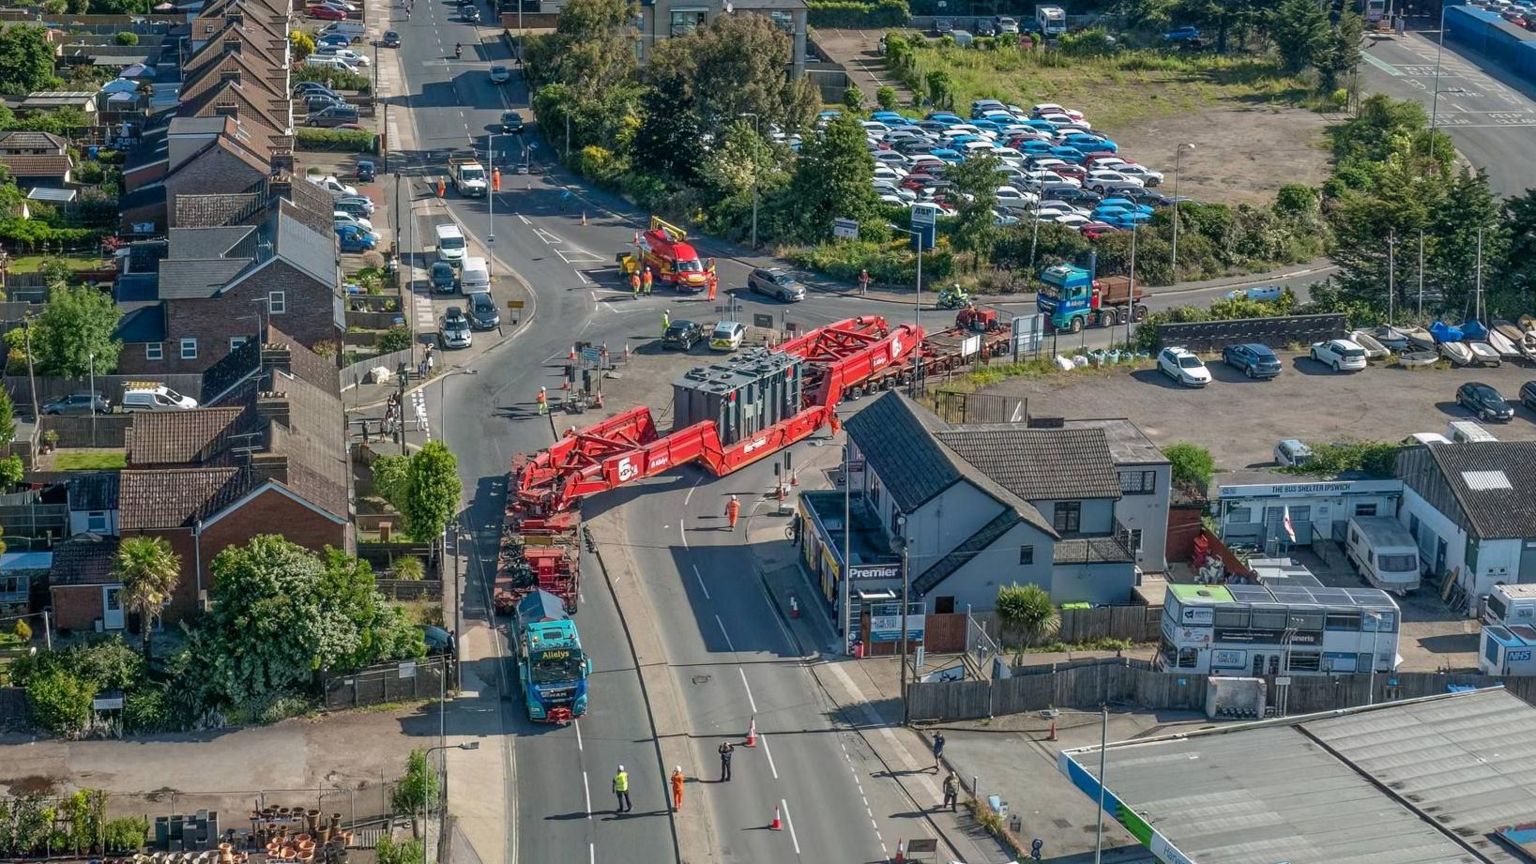 An aerial photograph of the abnormal load passing through Ipswich